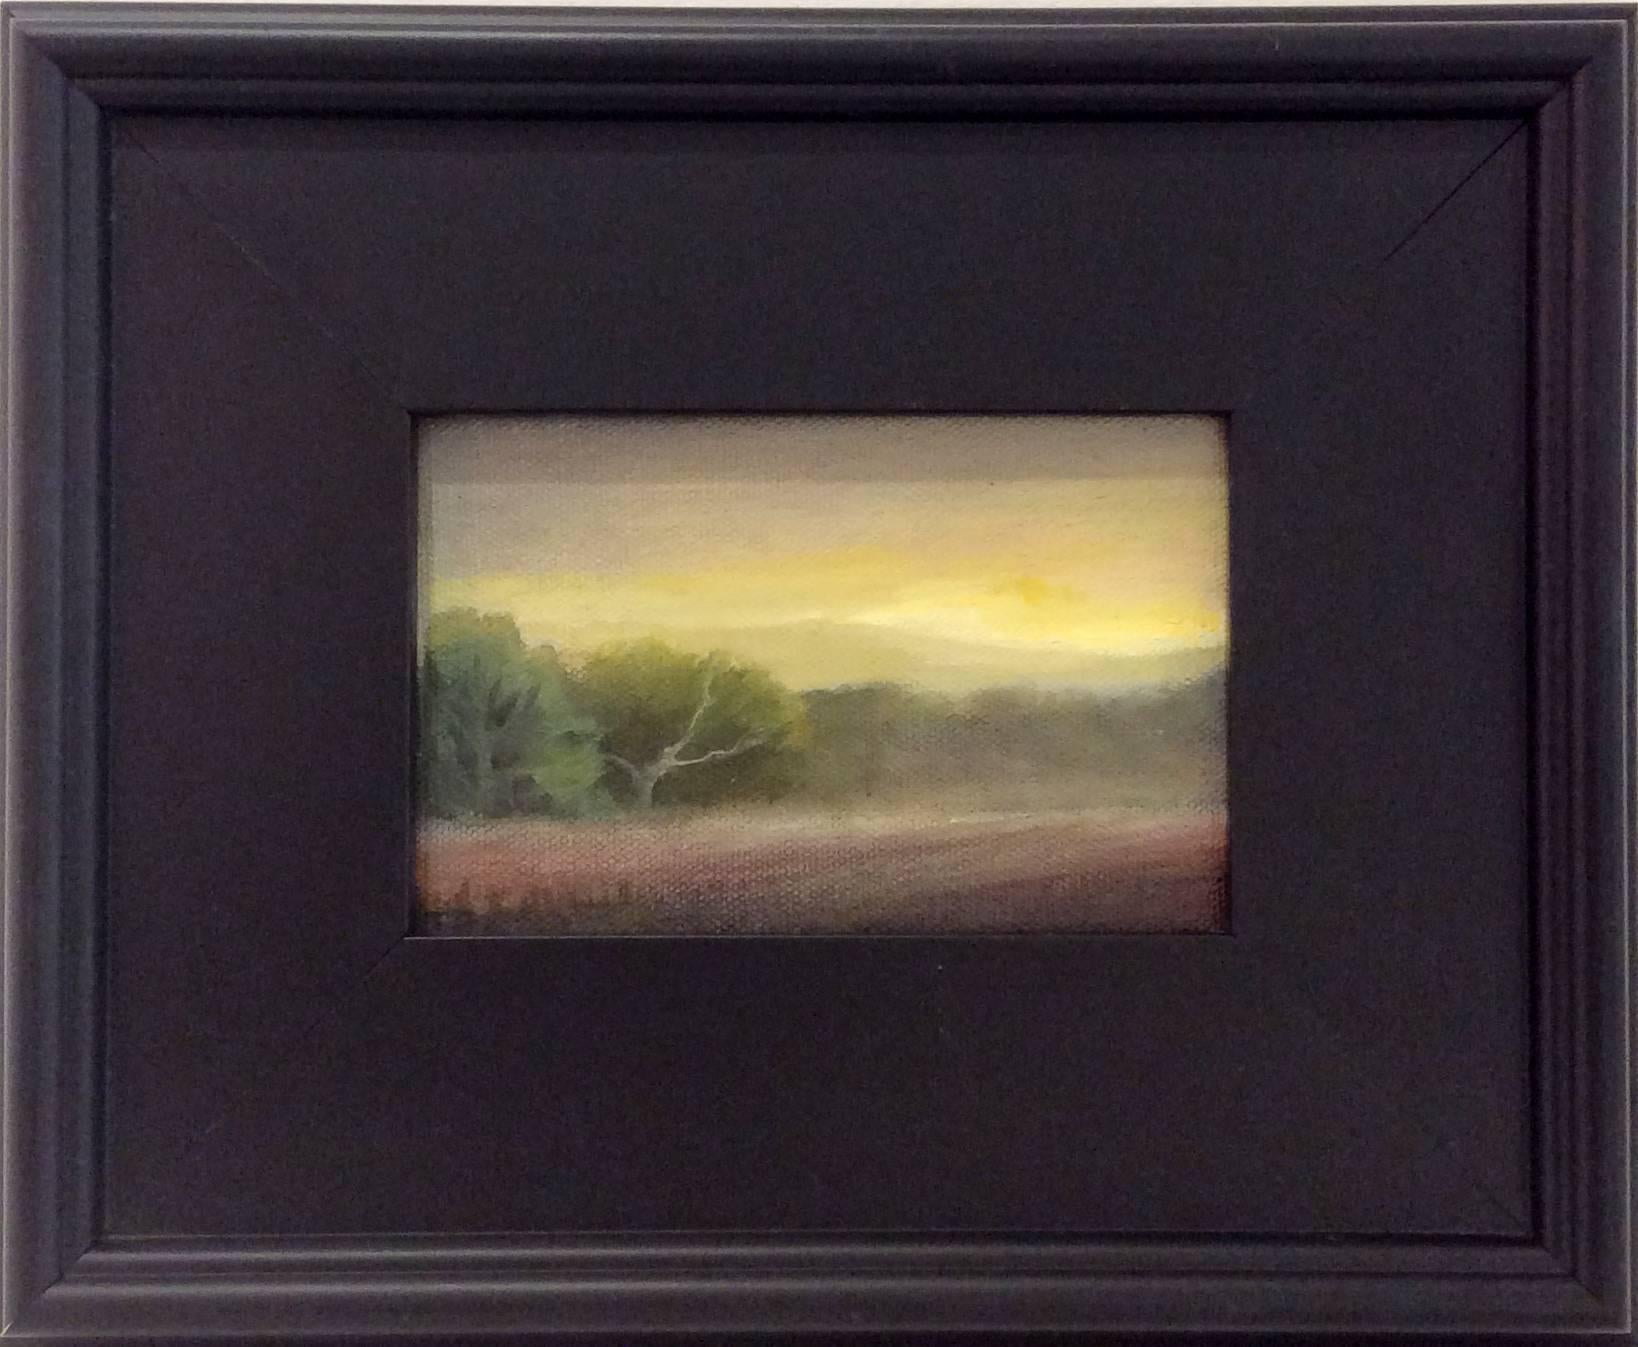 Judy Reynolds Landscape Painting - Misty Morn (Small Landscape Oil Painting of Green Country Field with Yellow Sky)